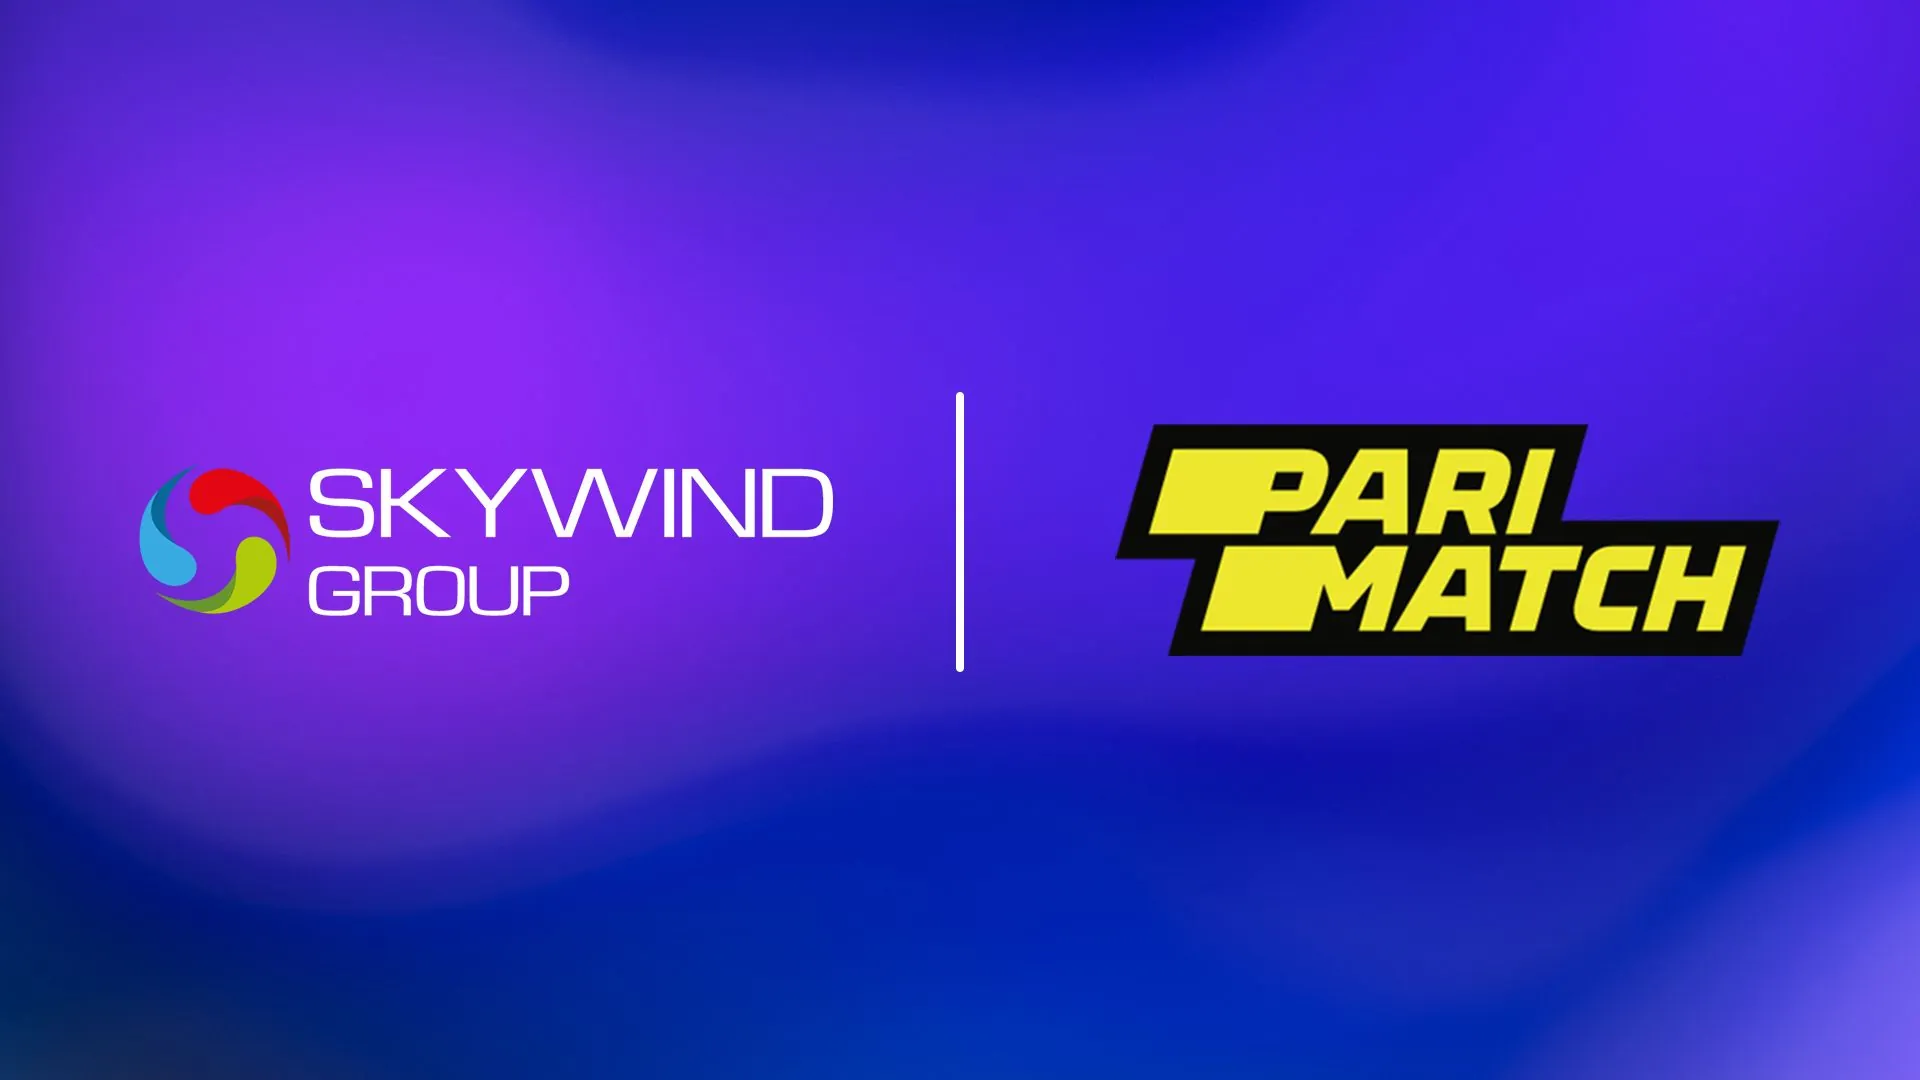 Skywind’s Top Games Join the  Superstar Lineup at Parimatch